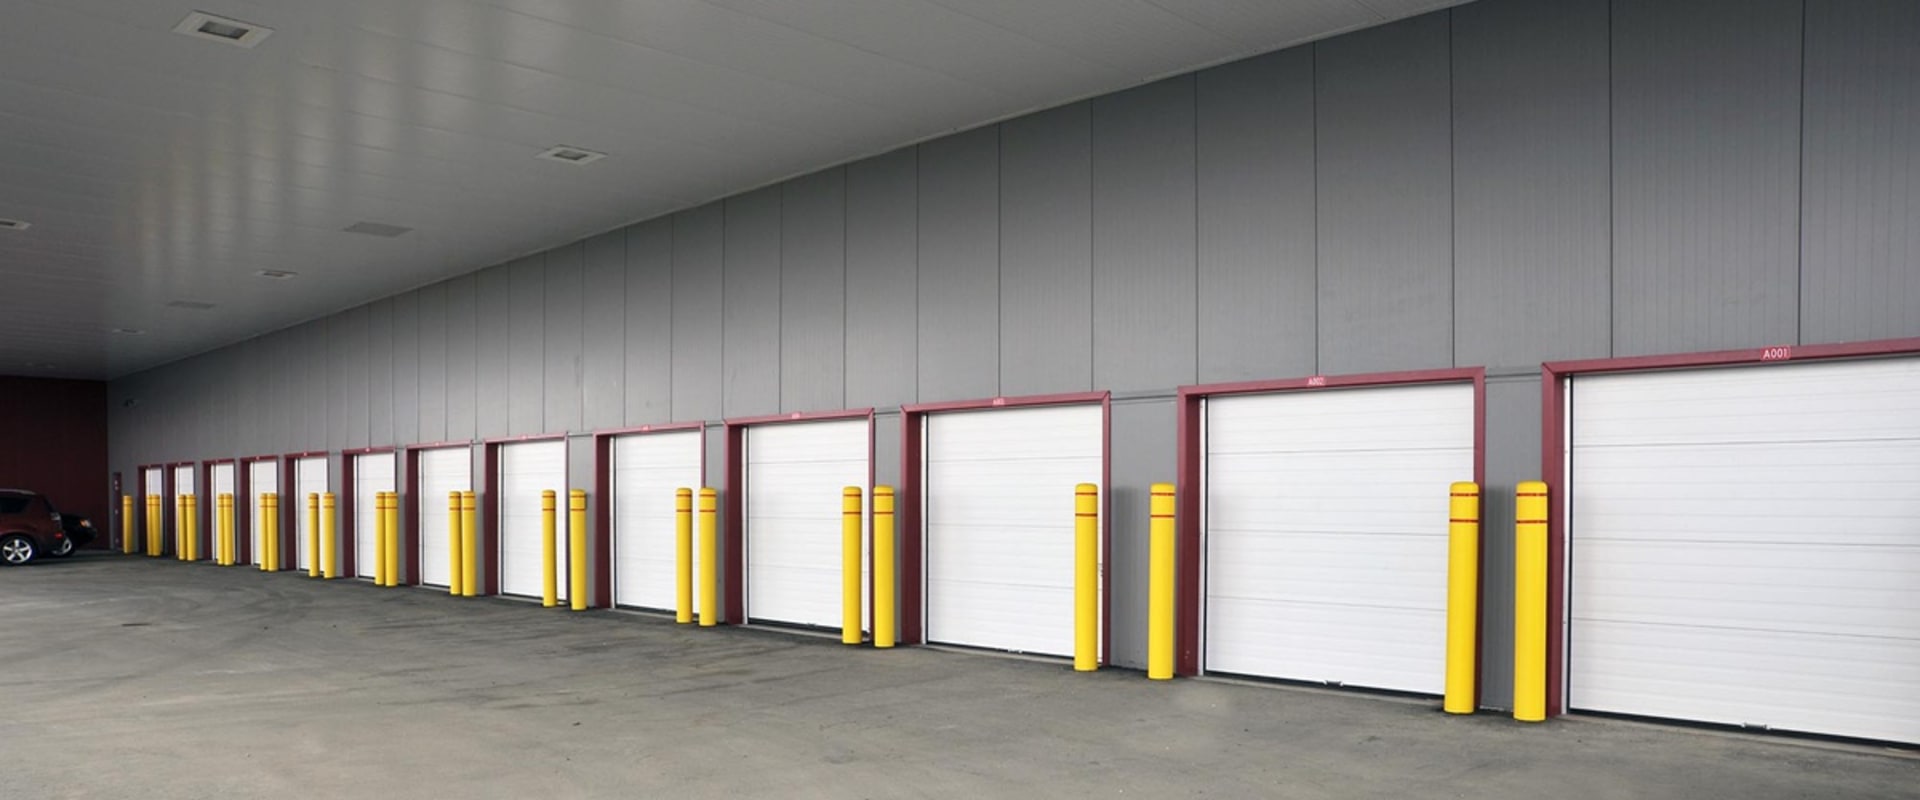 24/7 Access to Storage Units: An Overview